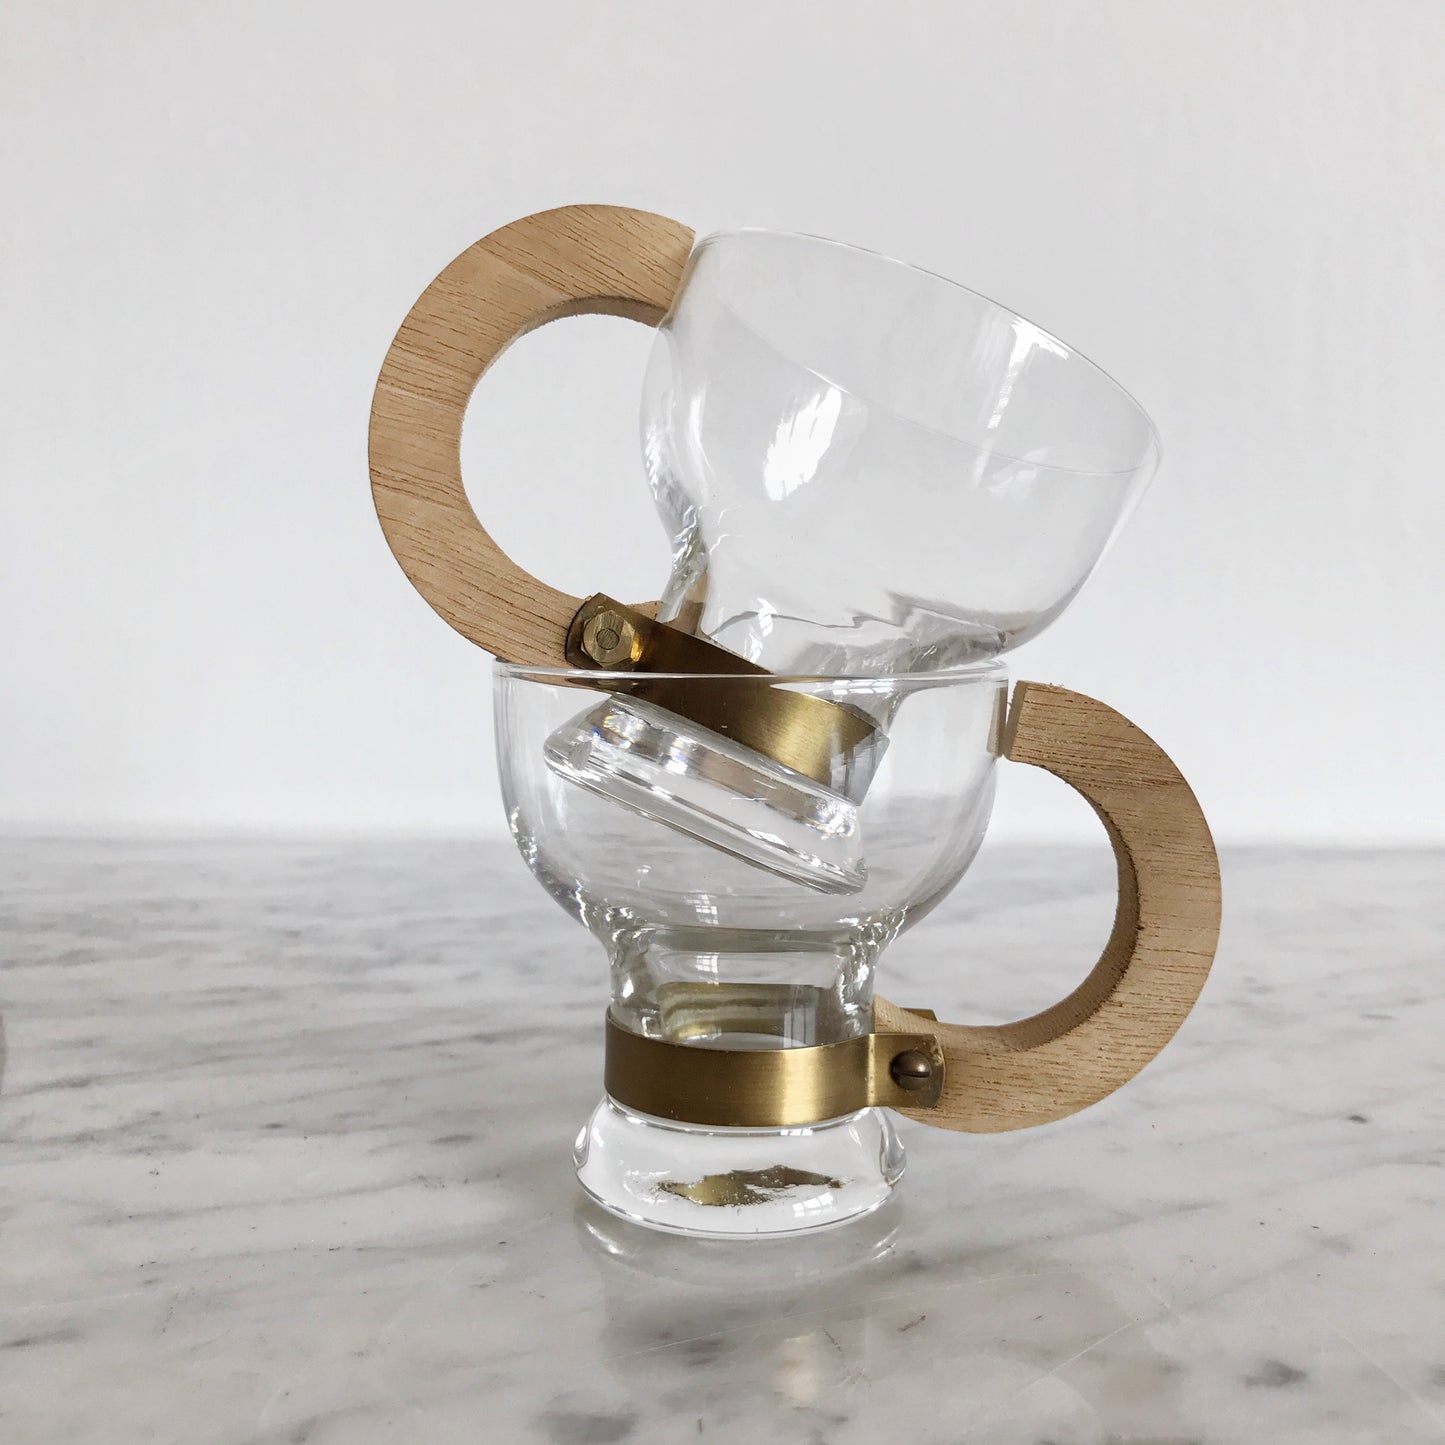 Set of 10 Glass Espresso Cups with Wooden Handles